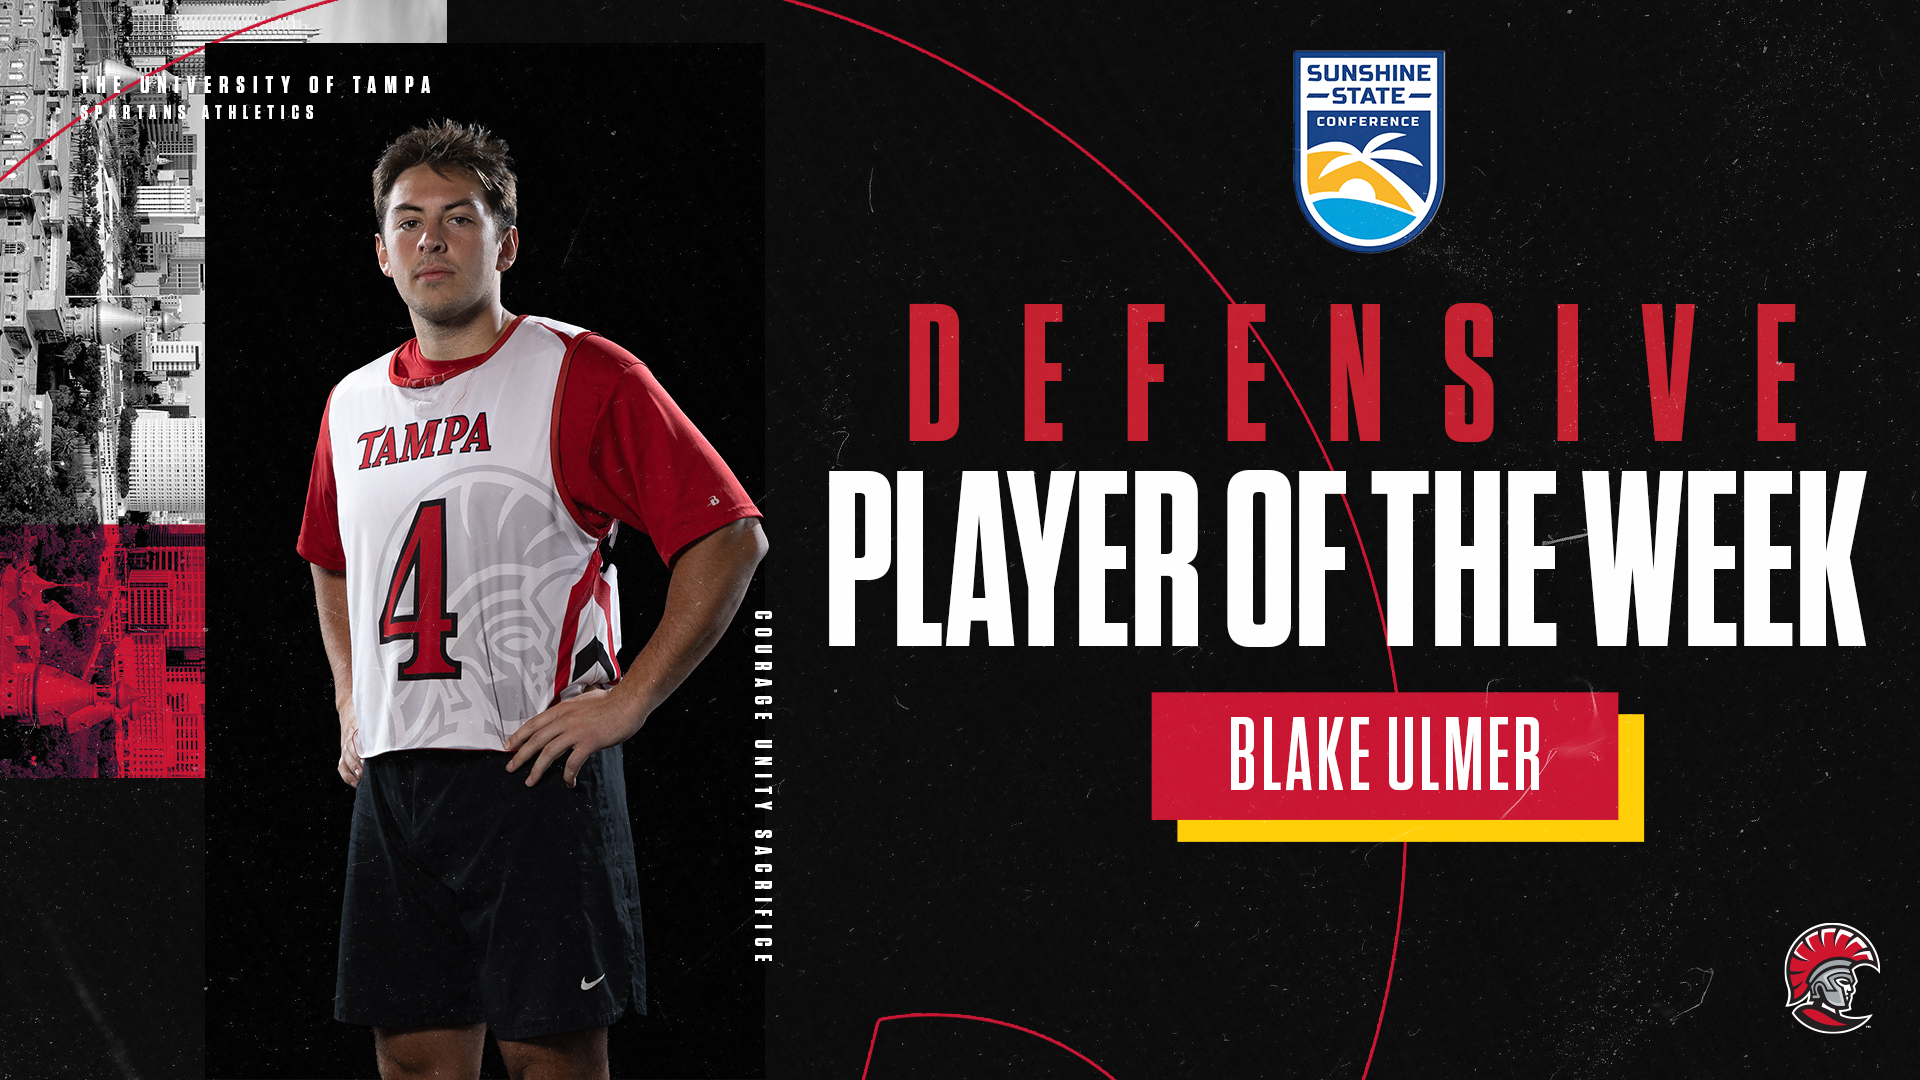 Blake Ulmer Sunshine State Conference Player of the Week